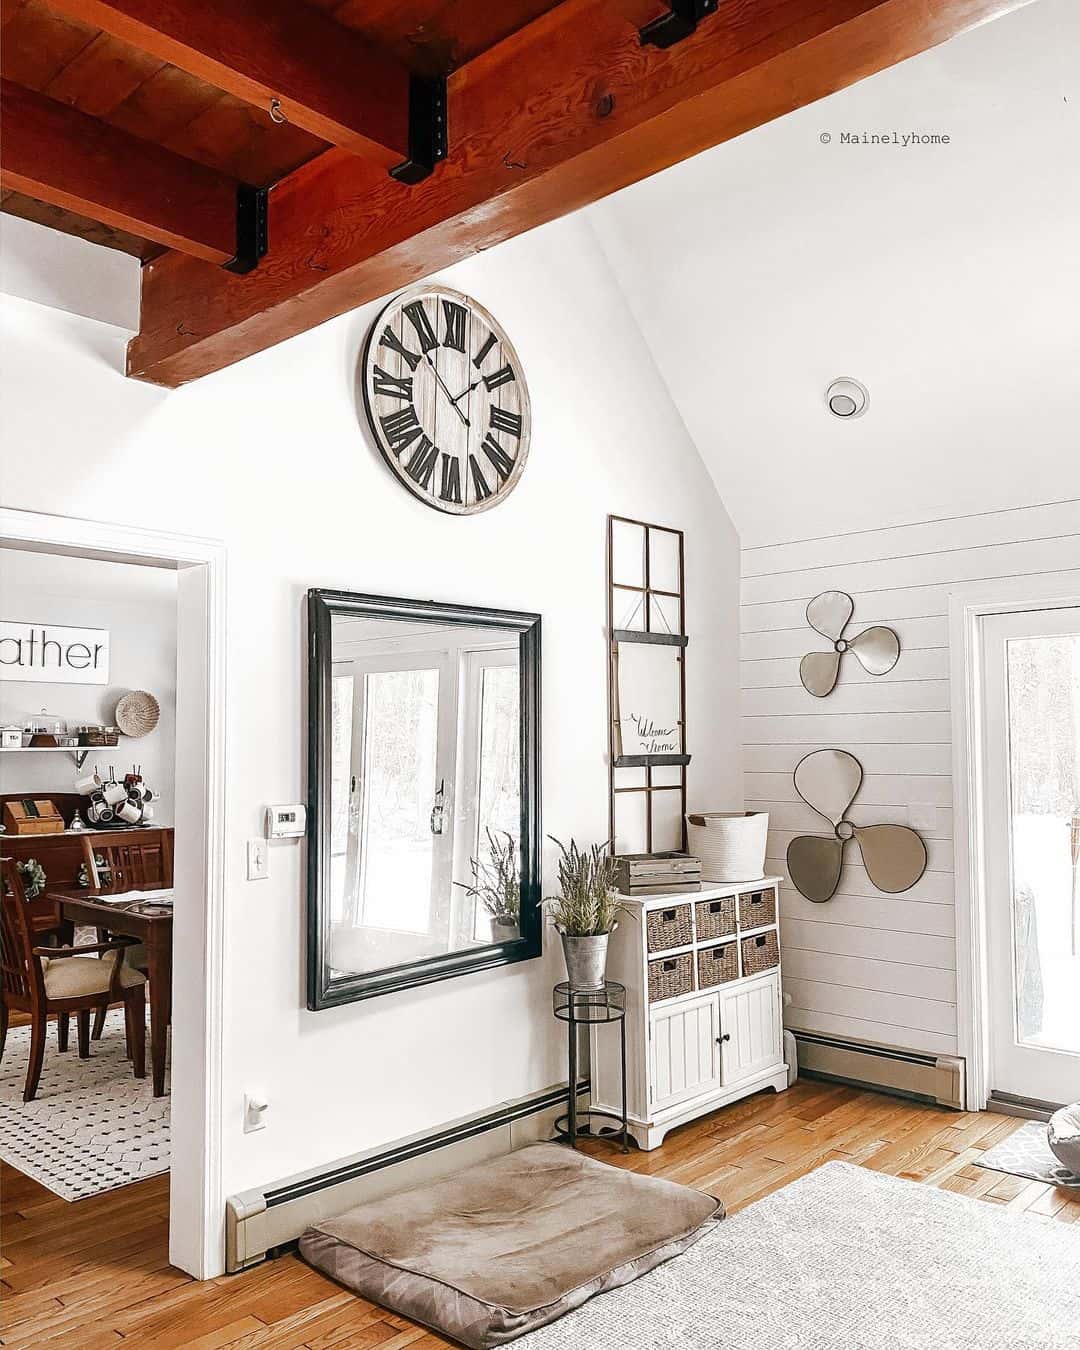 Elevating Vaulted Ceilings with Vintage Décor